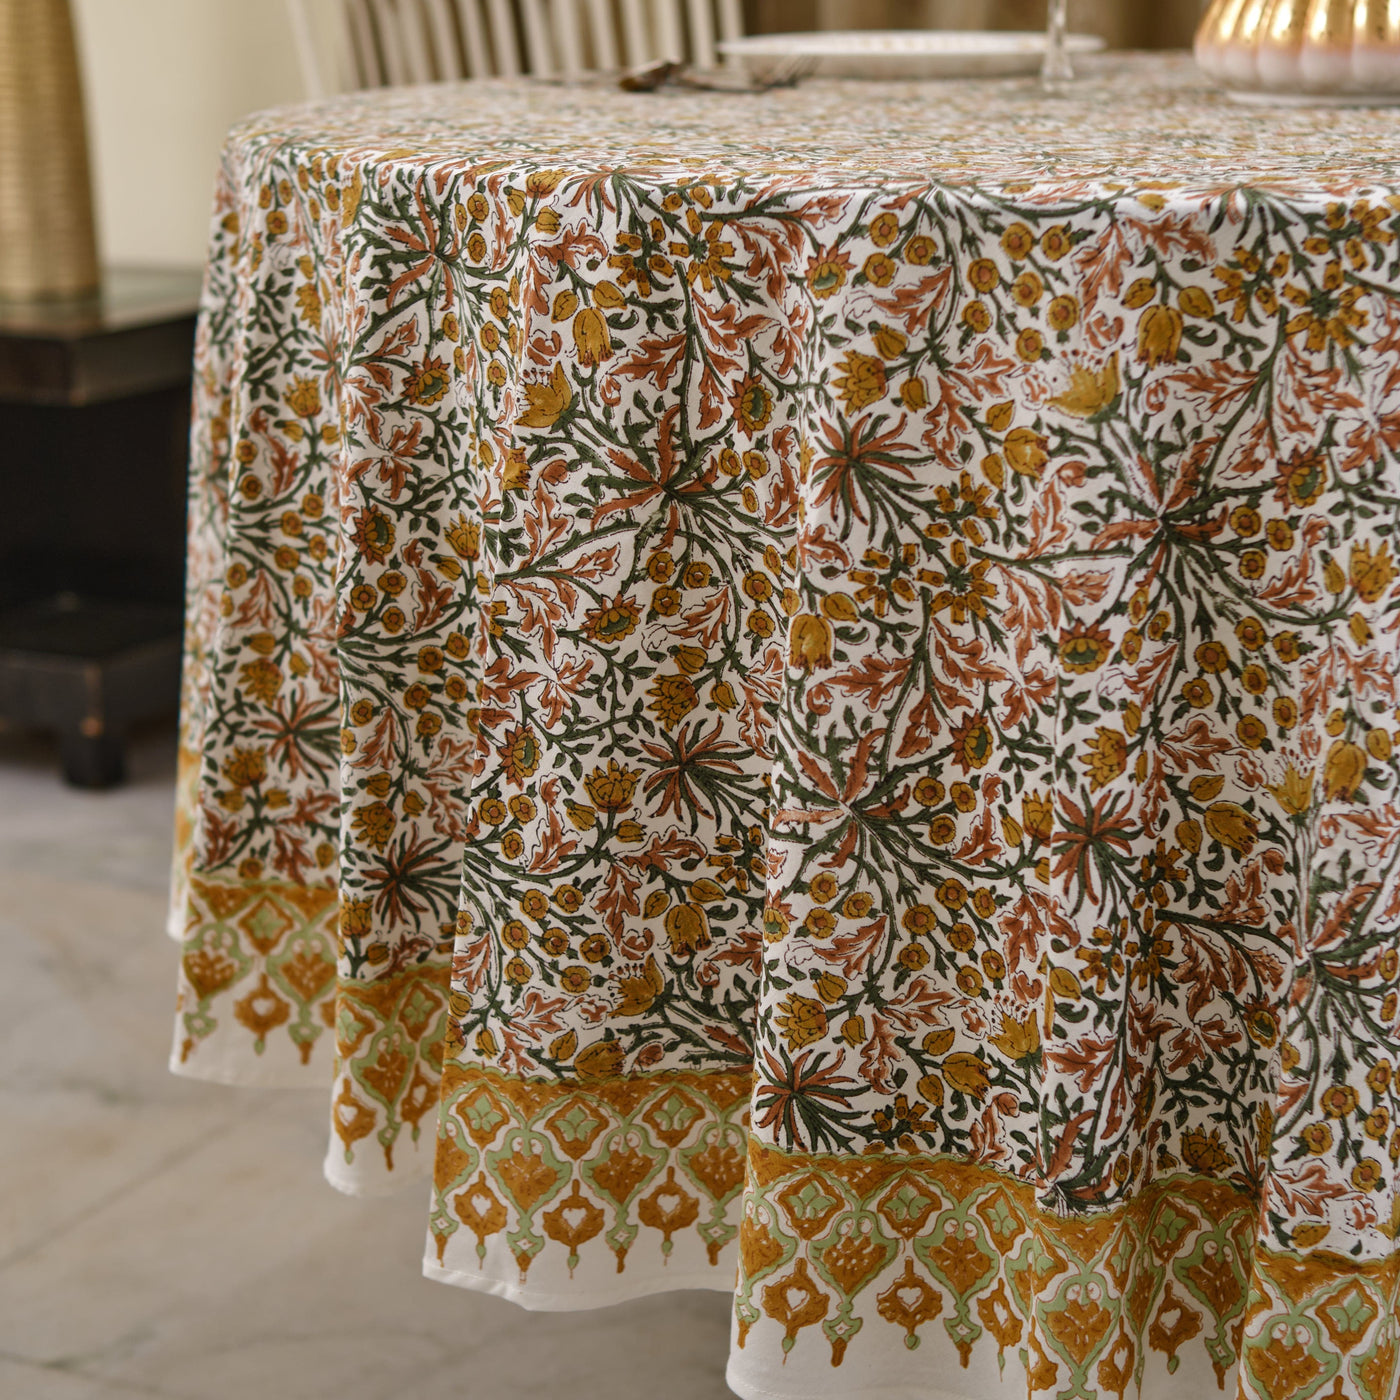 LF table linen Imogen Round Cotton Tablecloth Table Cover (With Optional Napkins)